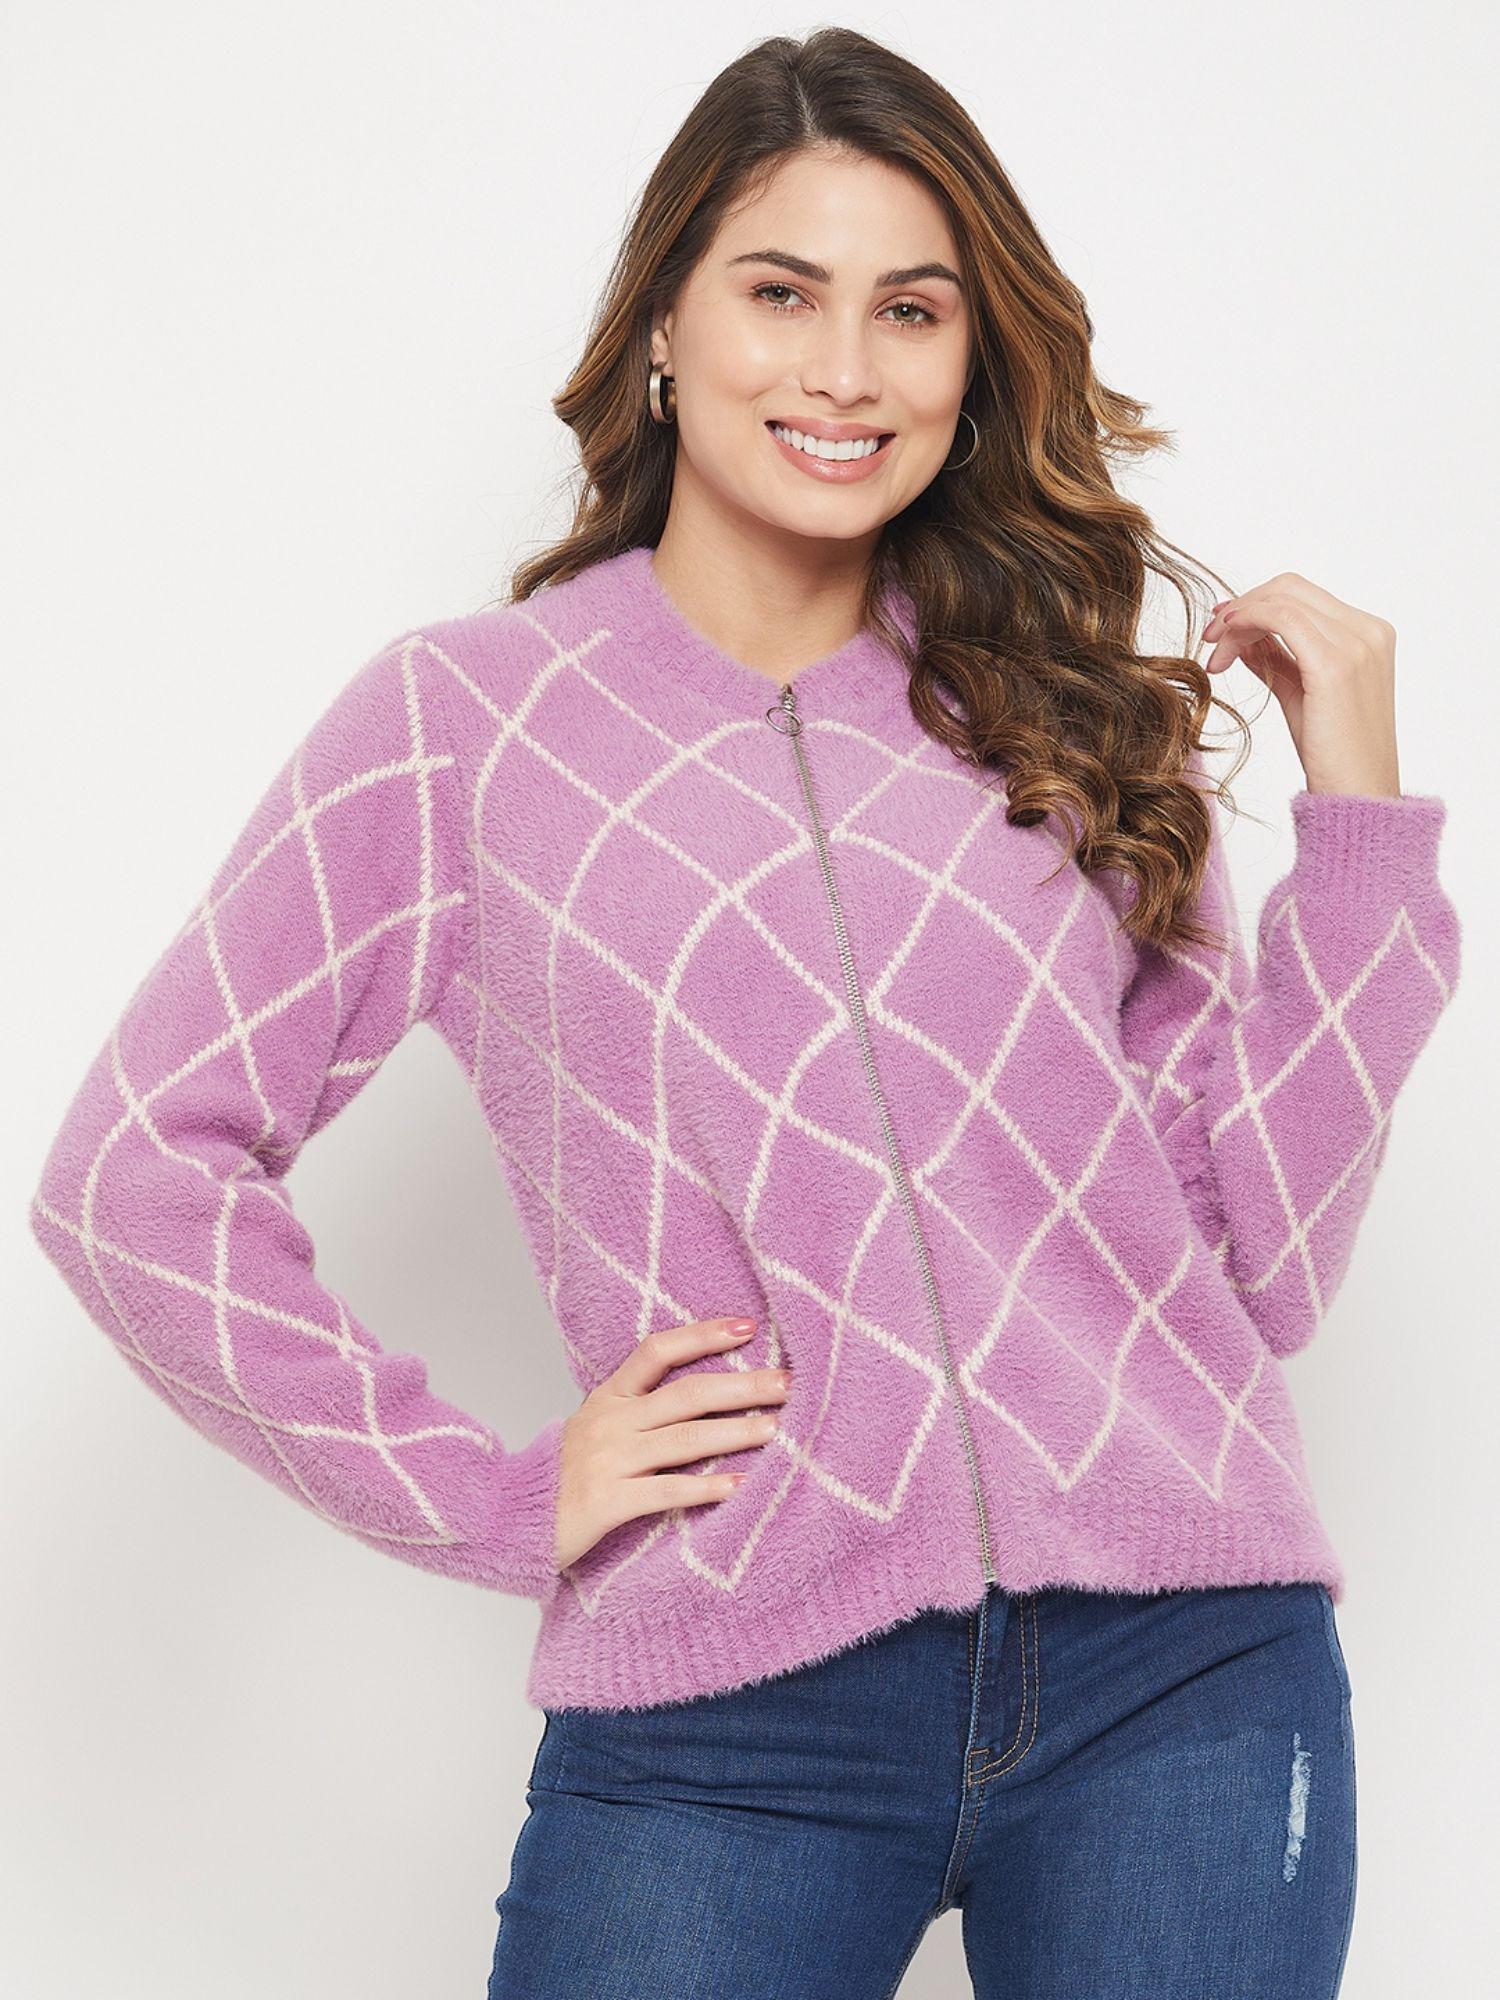 patterned-lilac-sweater